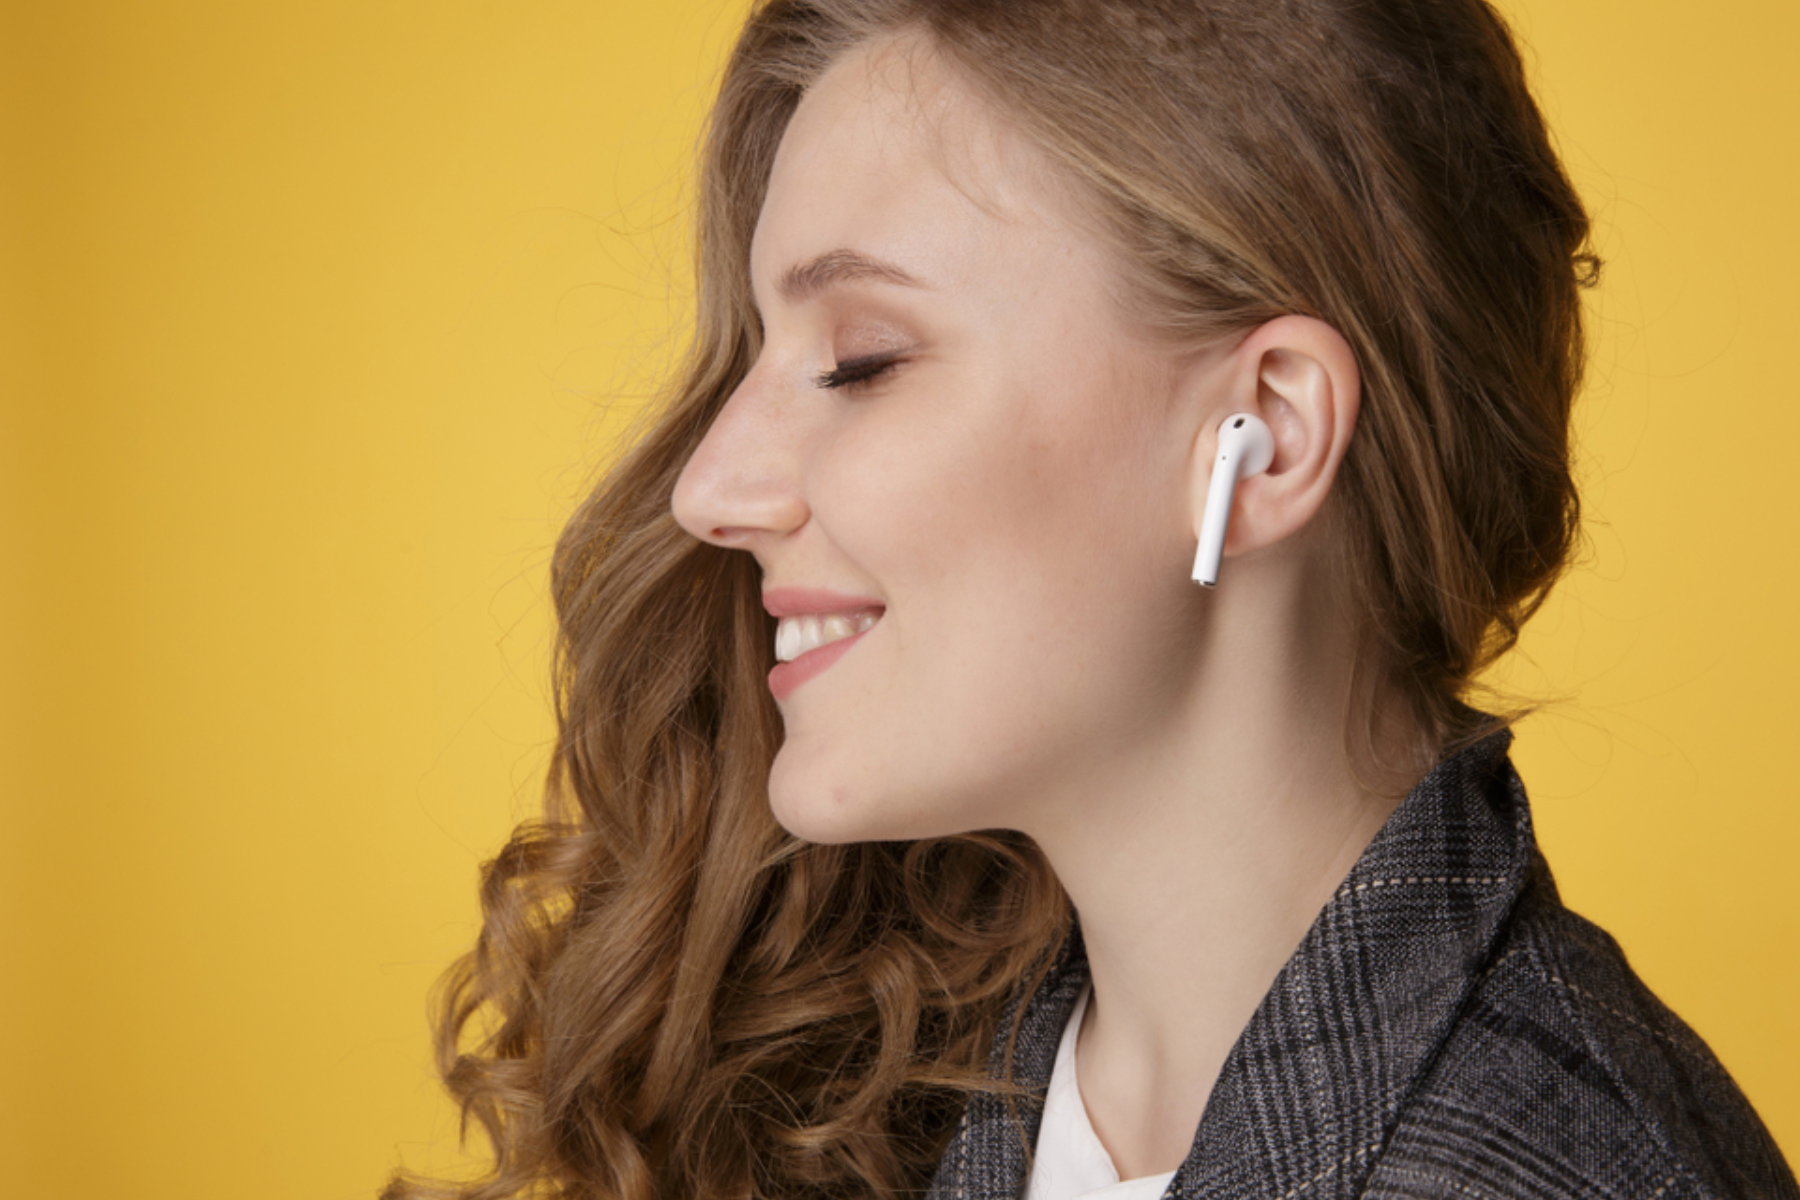 A woman wearing an airpods against a yellow background